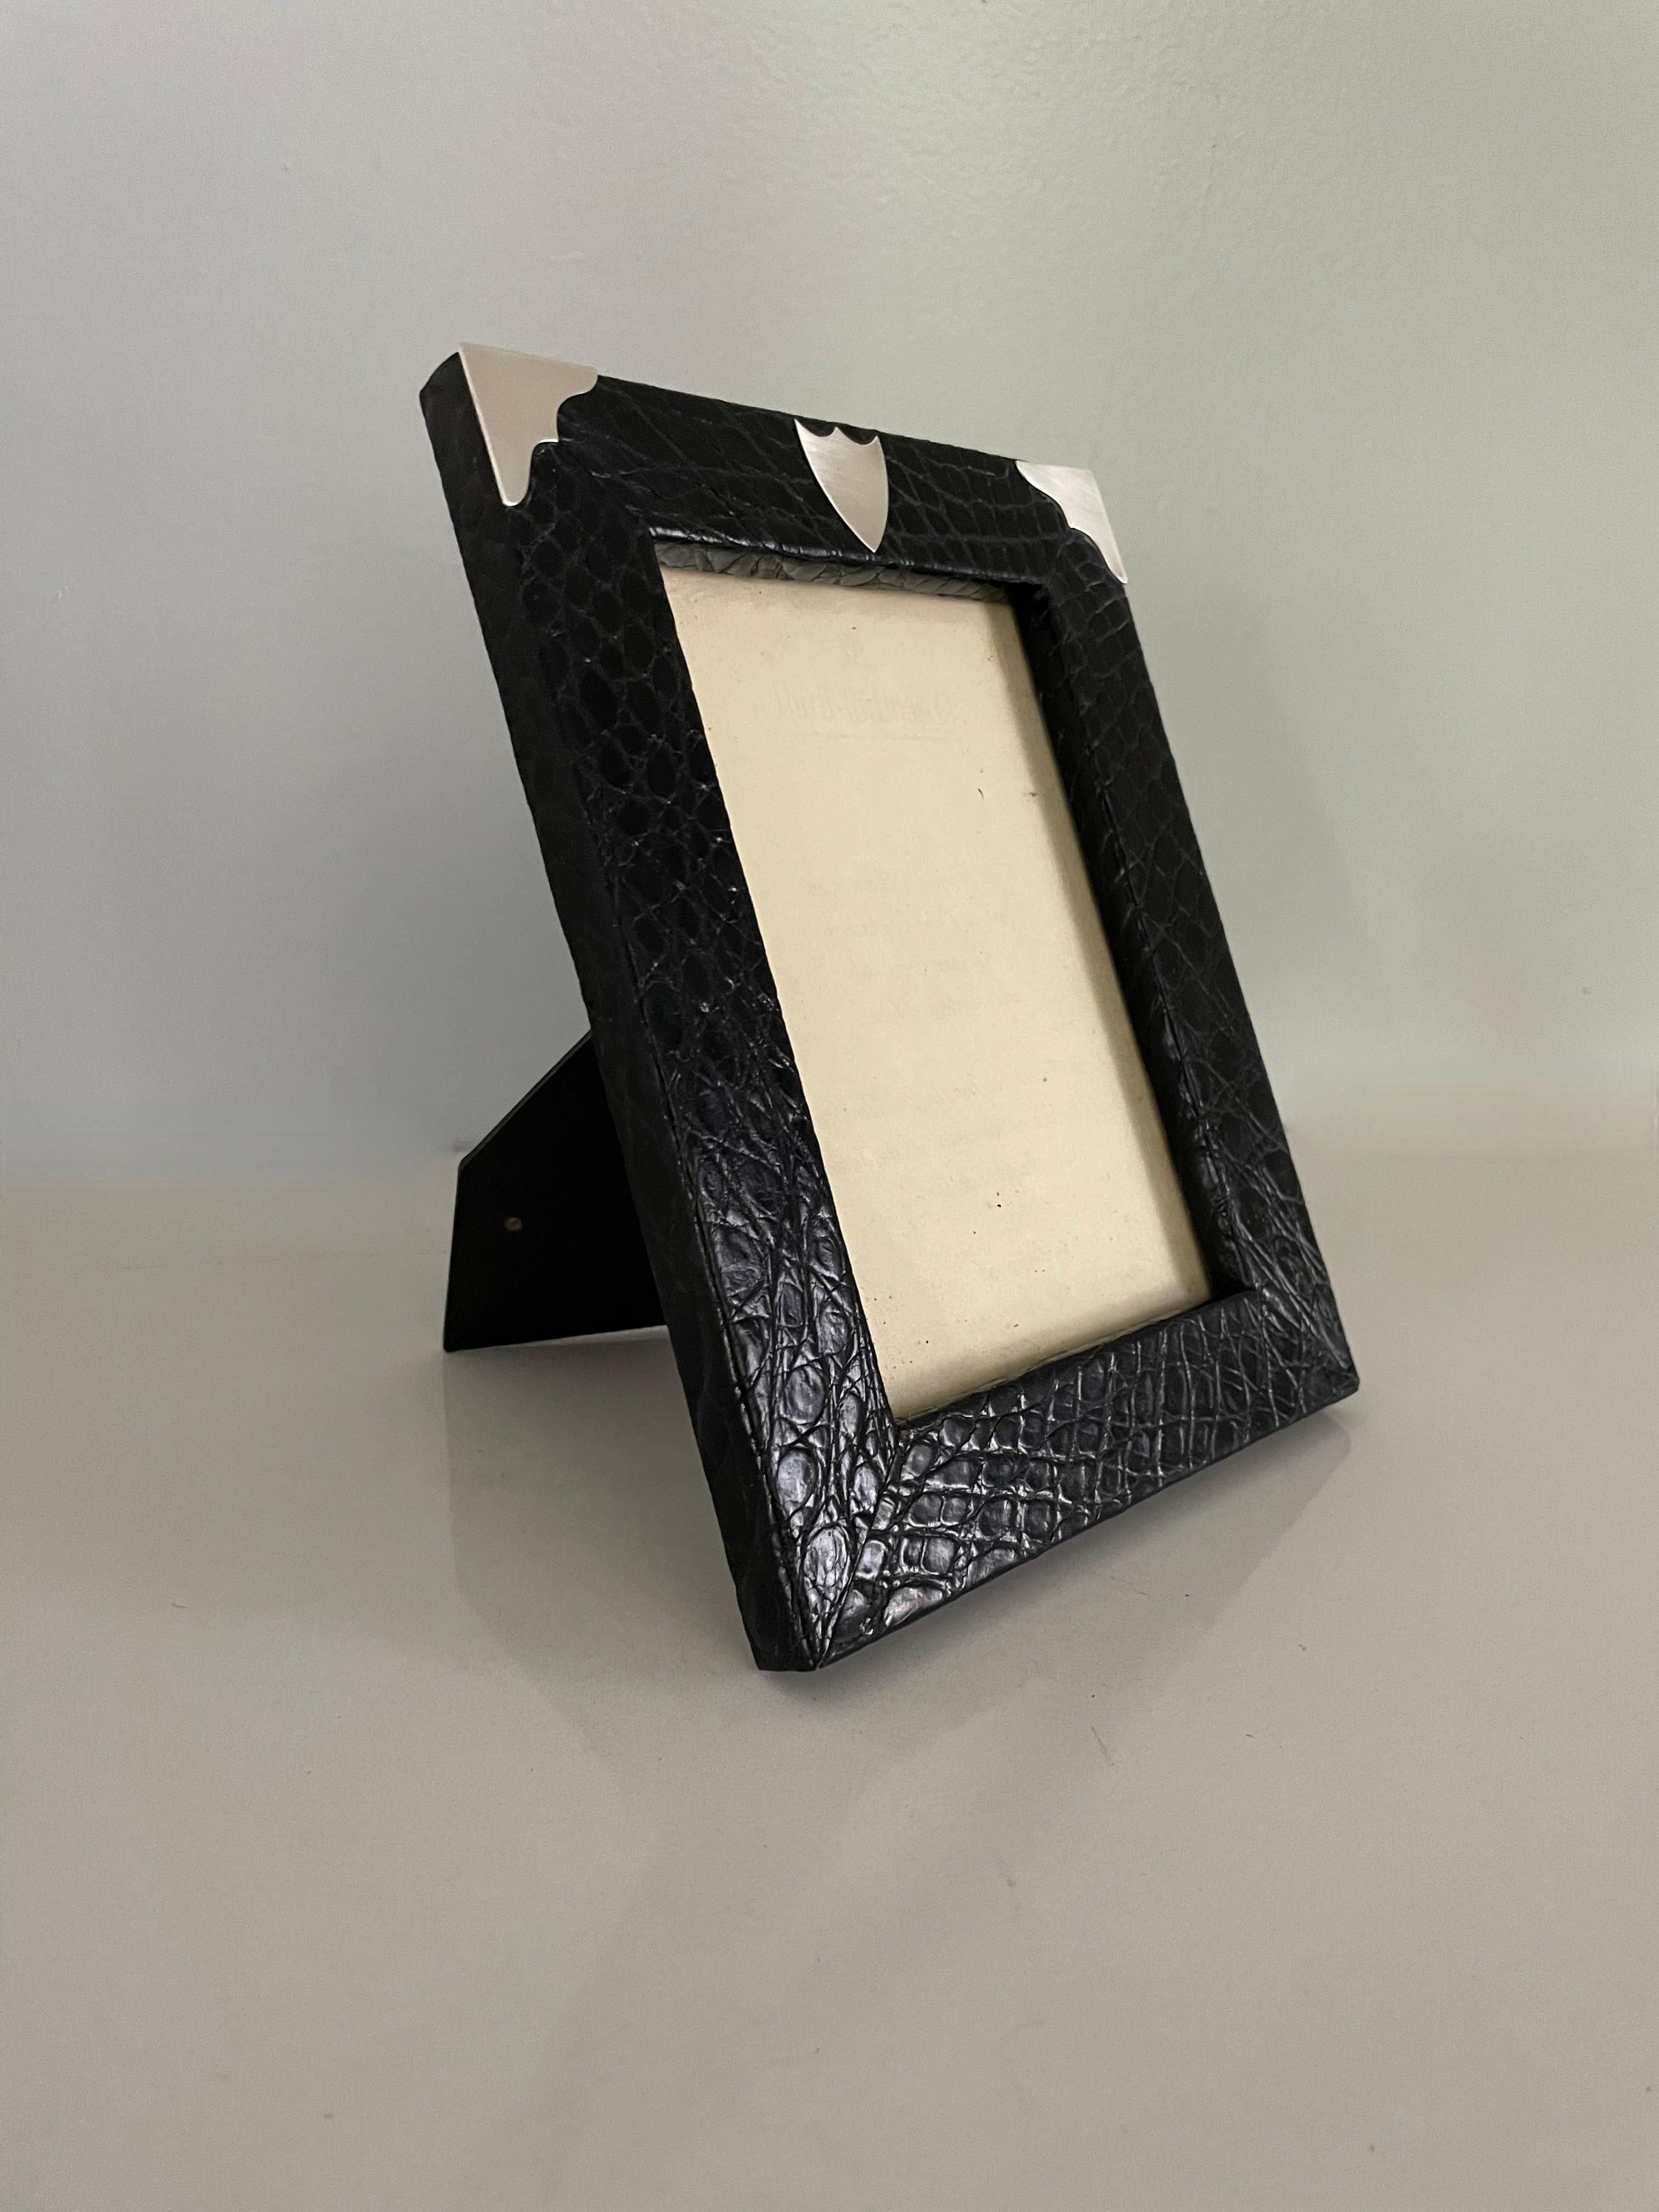 A beautiful English frame made of Alligator and sterling silver corners. A beautiful frame in the style of Ralph Lauren - in very good condition and ready to house a photo of anyone beautifully styled for your bedroom, living room, console table or